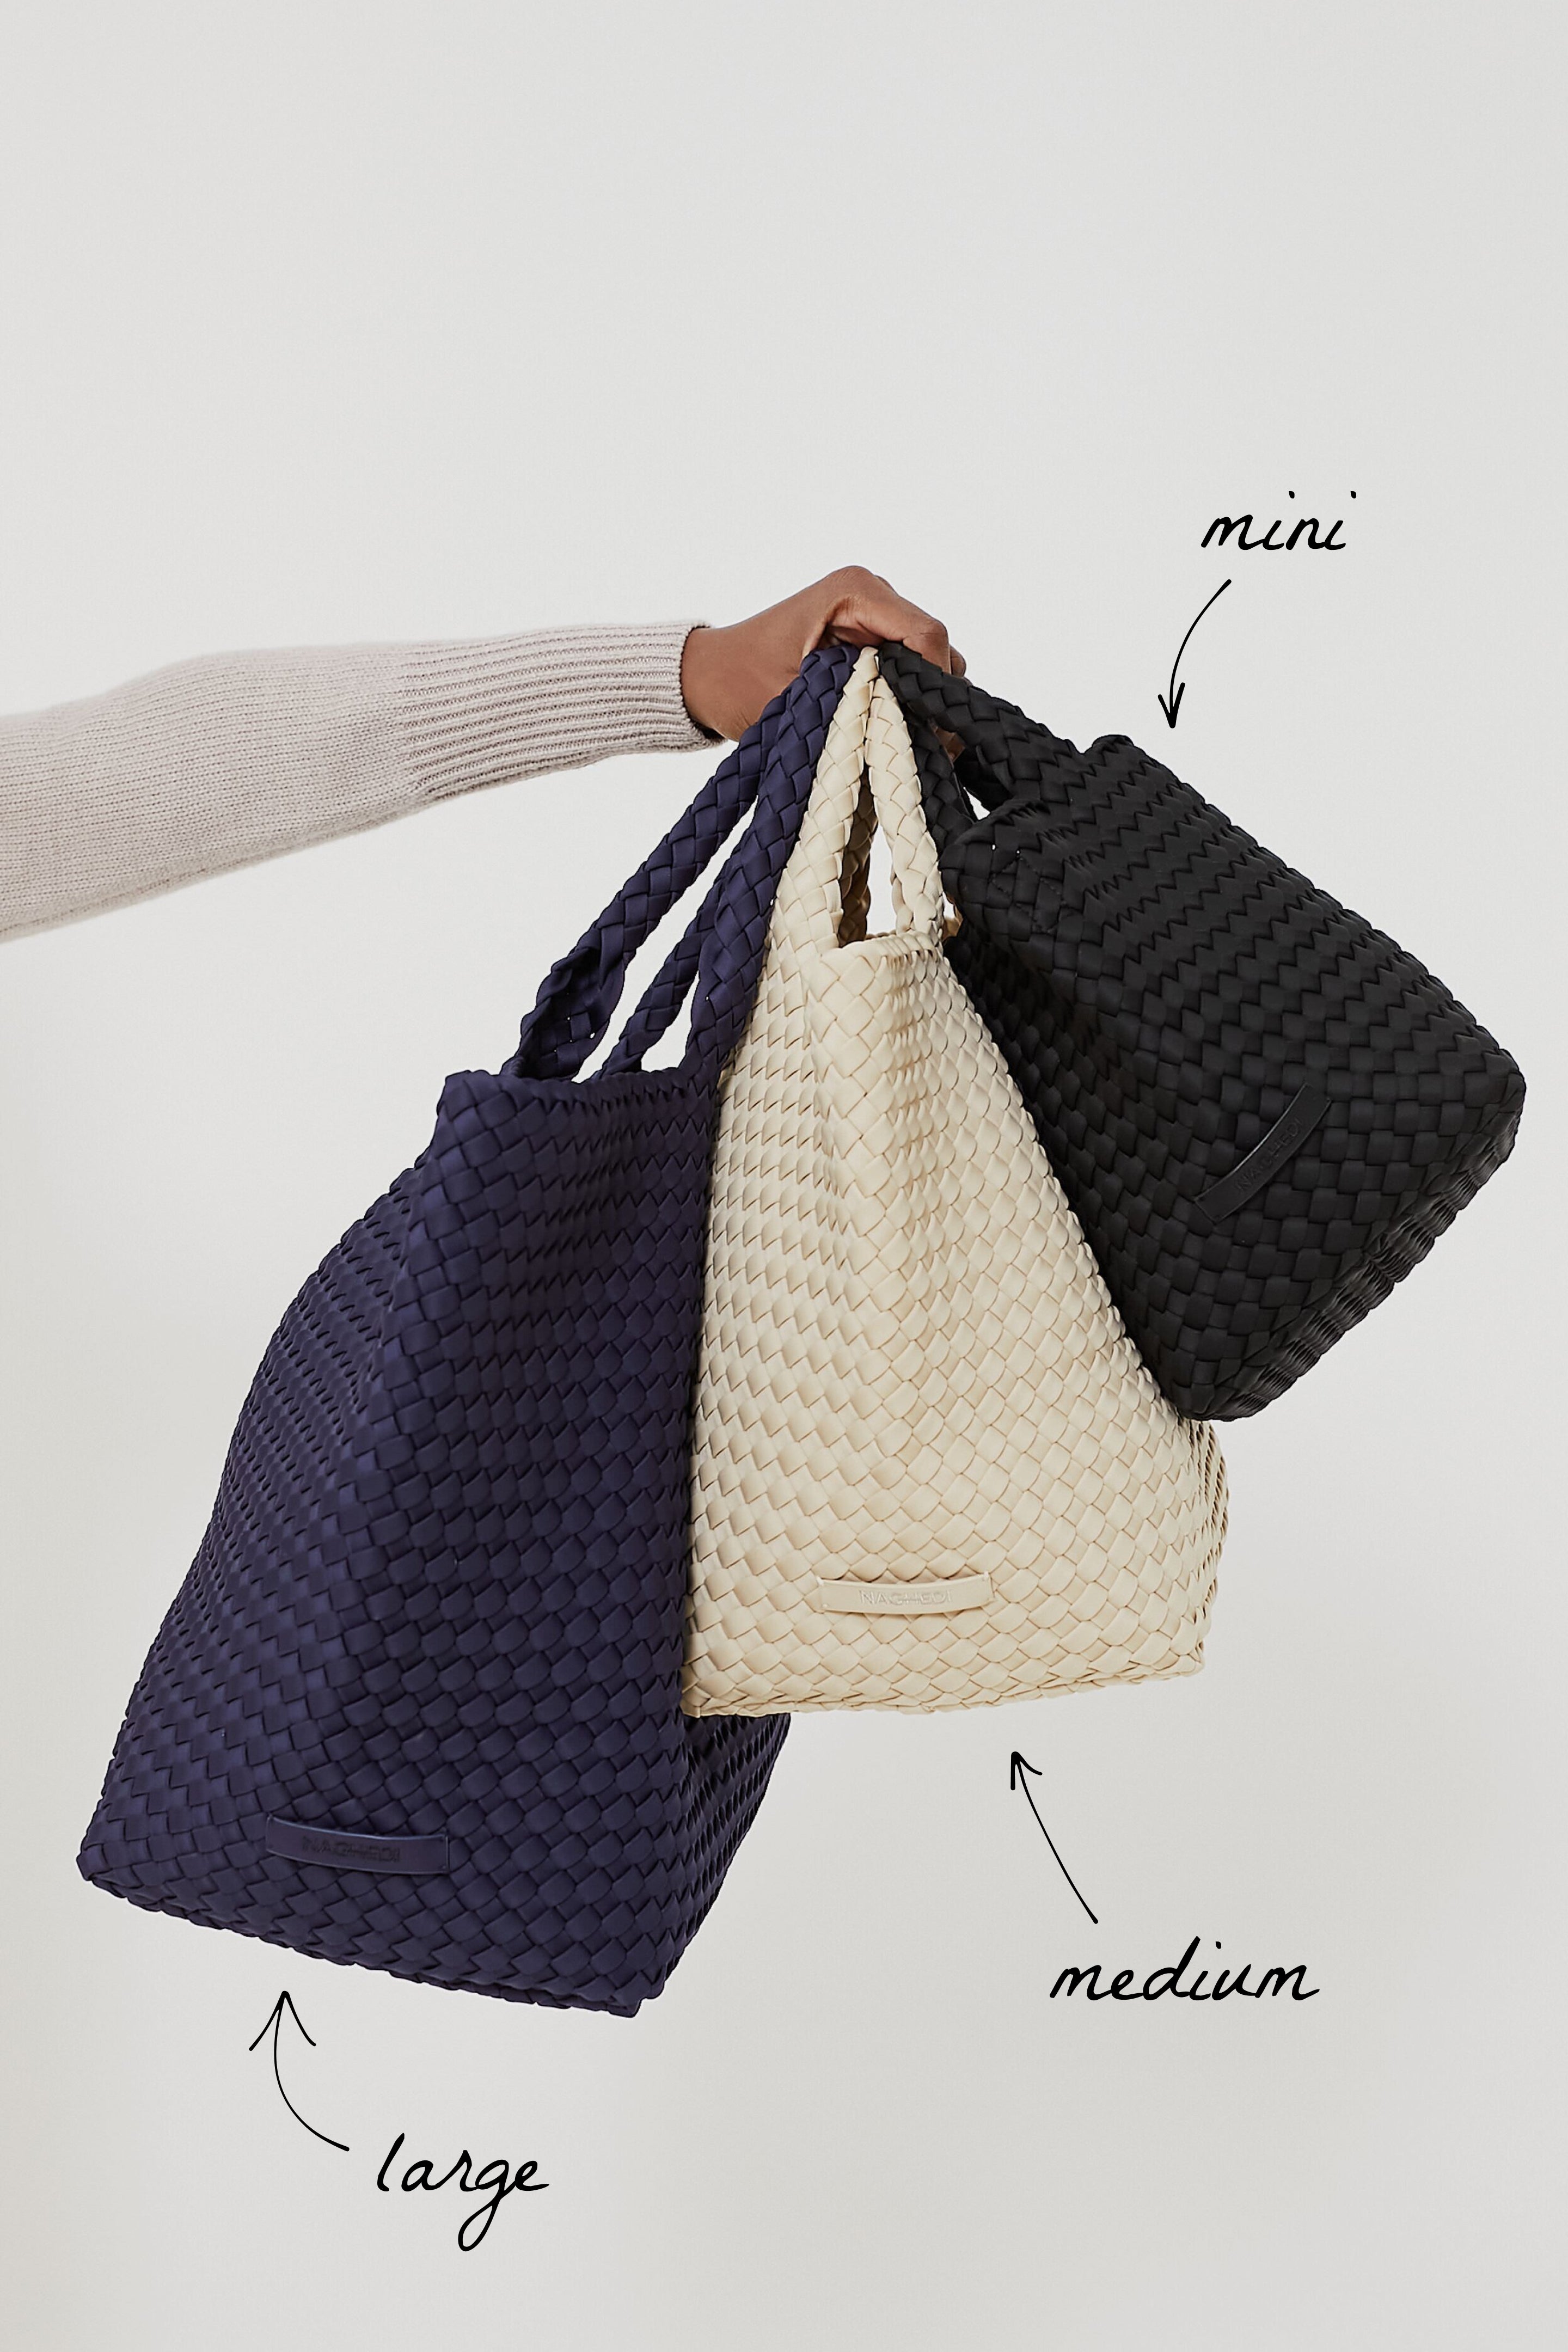 Clare V. Simple Stripe Suede Tote, 15 Great Travel Bags For Your Next  Family Trip